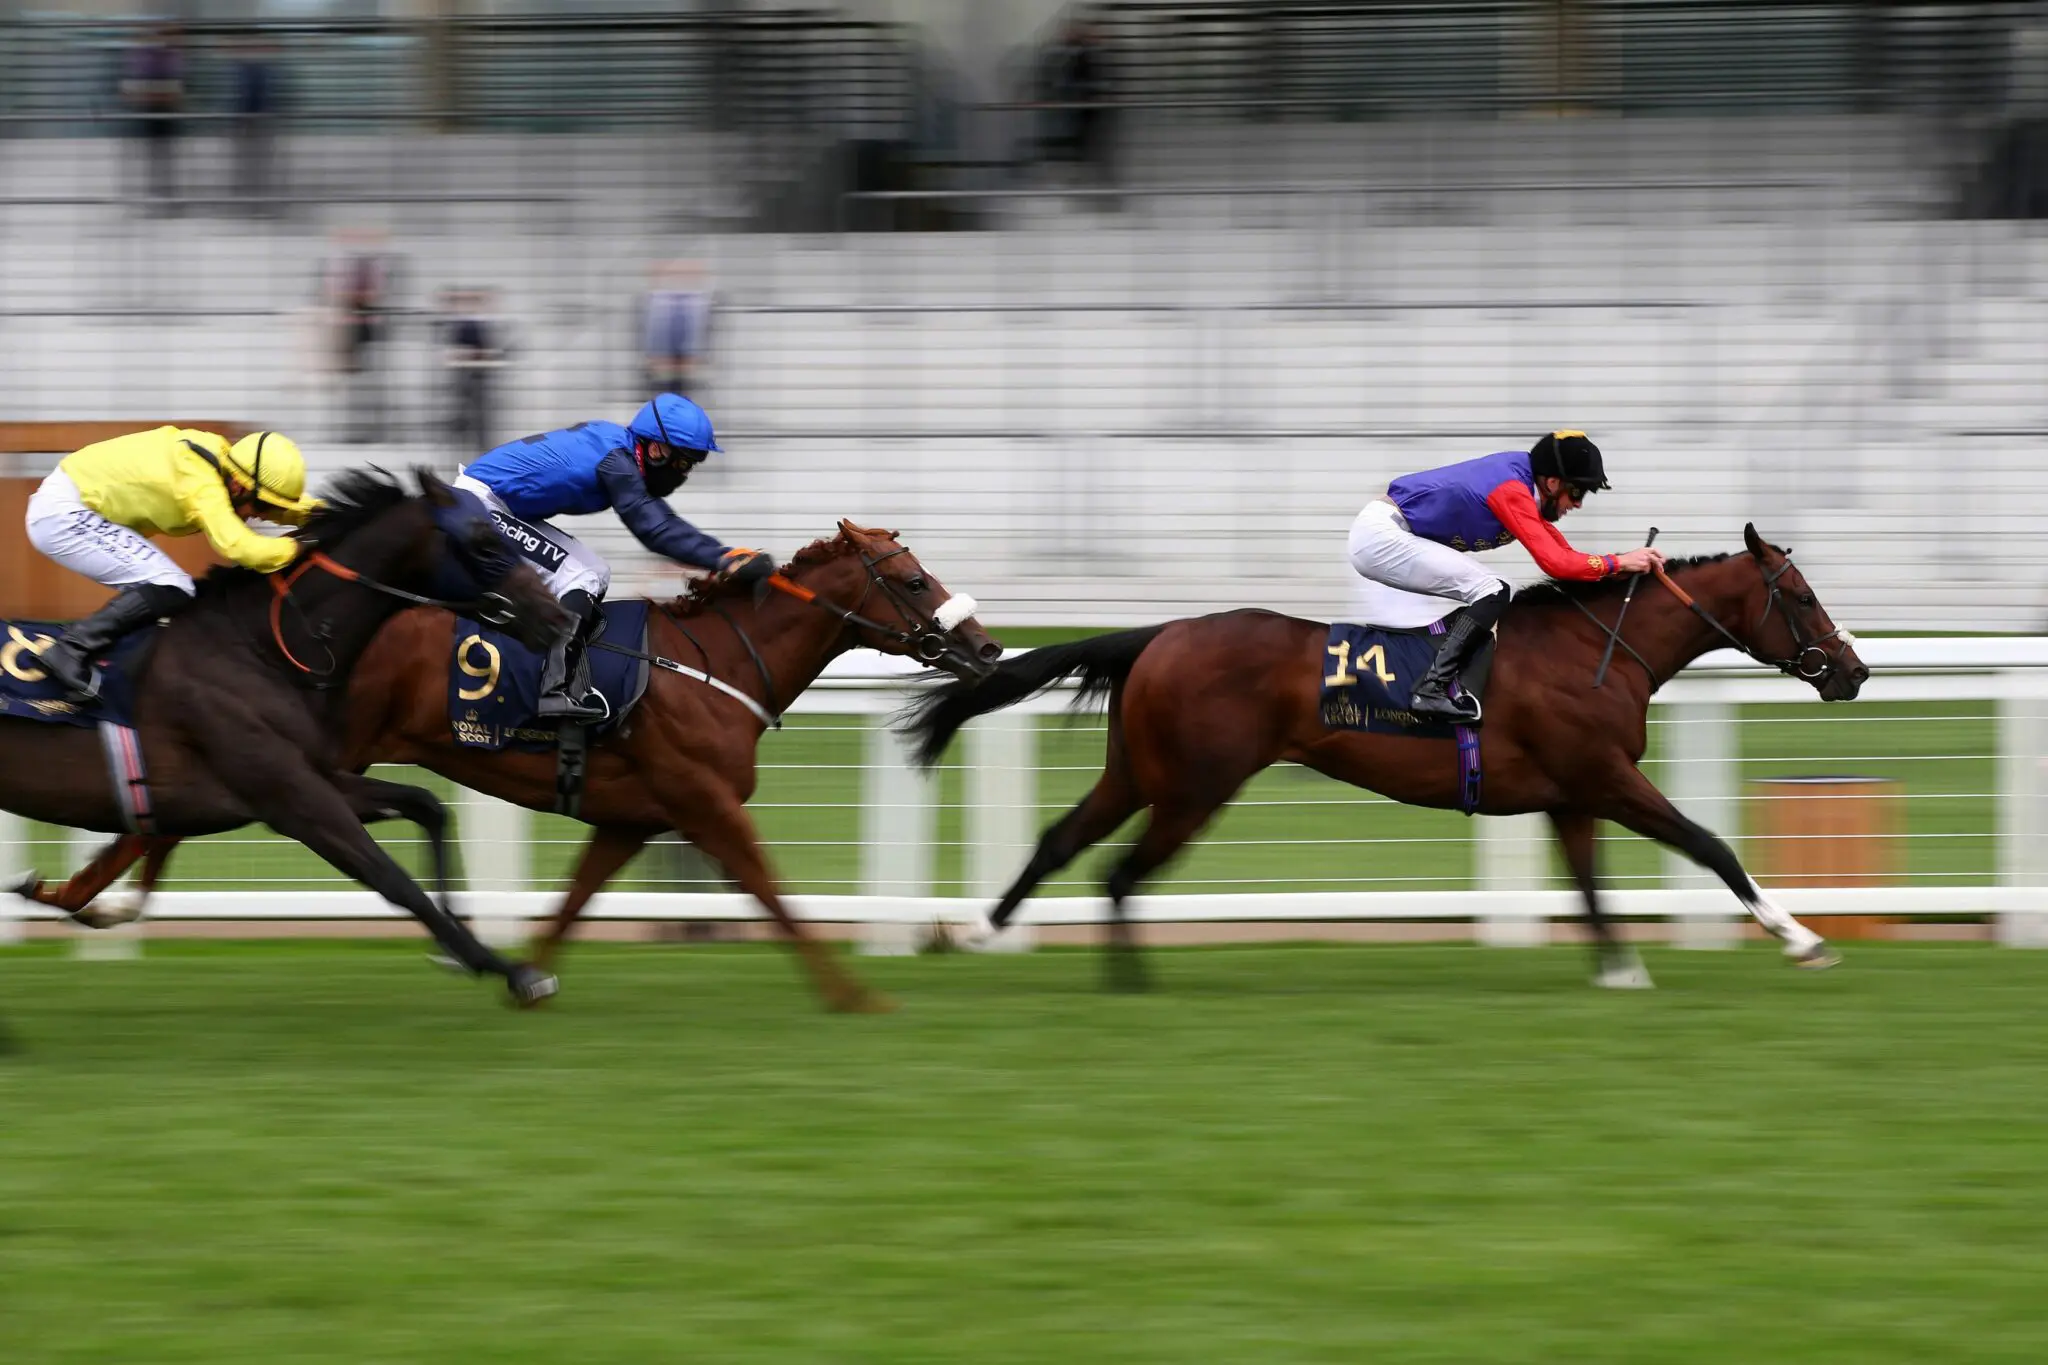 Image of horses racing of the track at Ascot